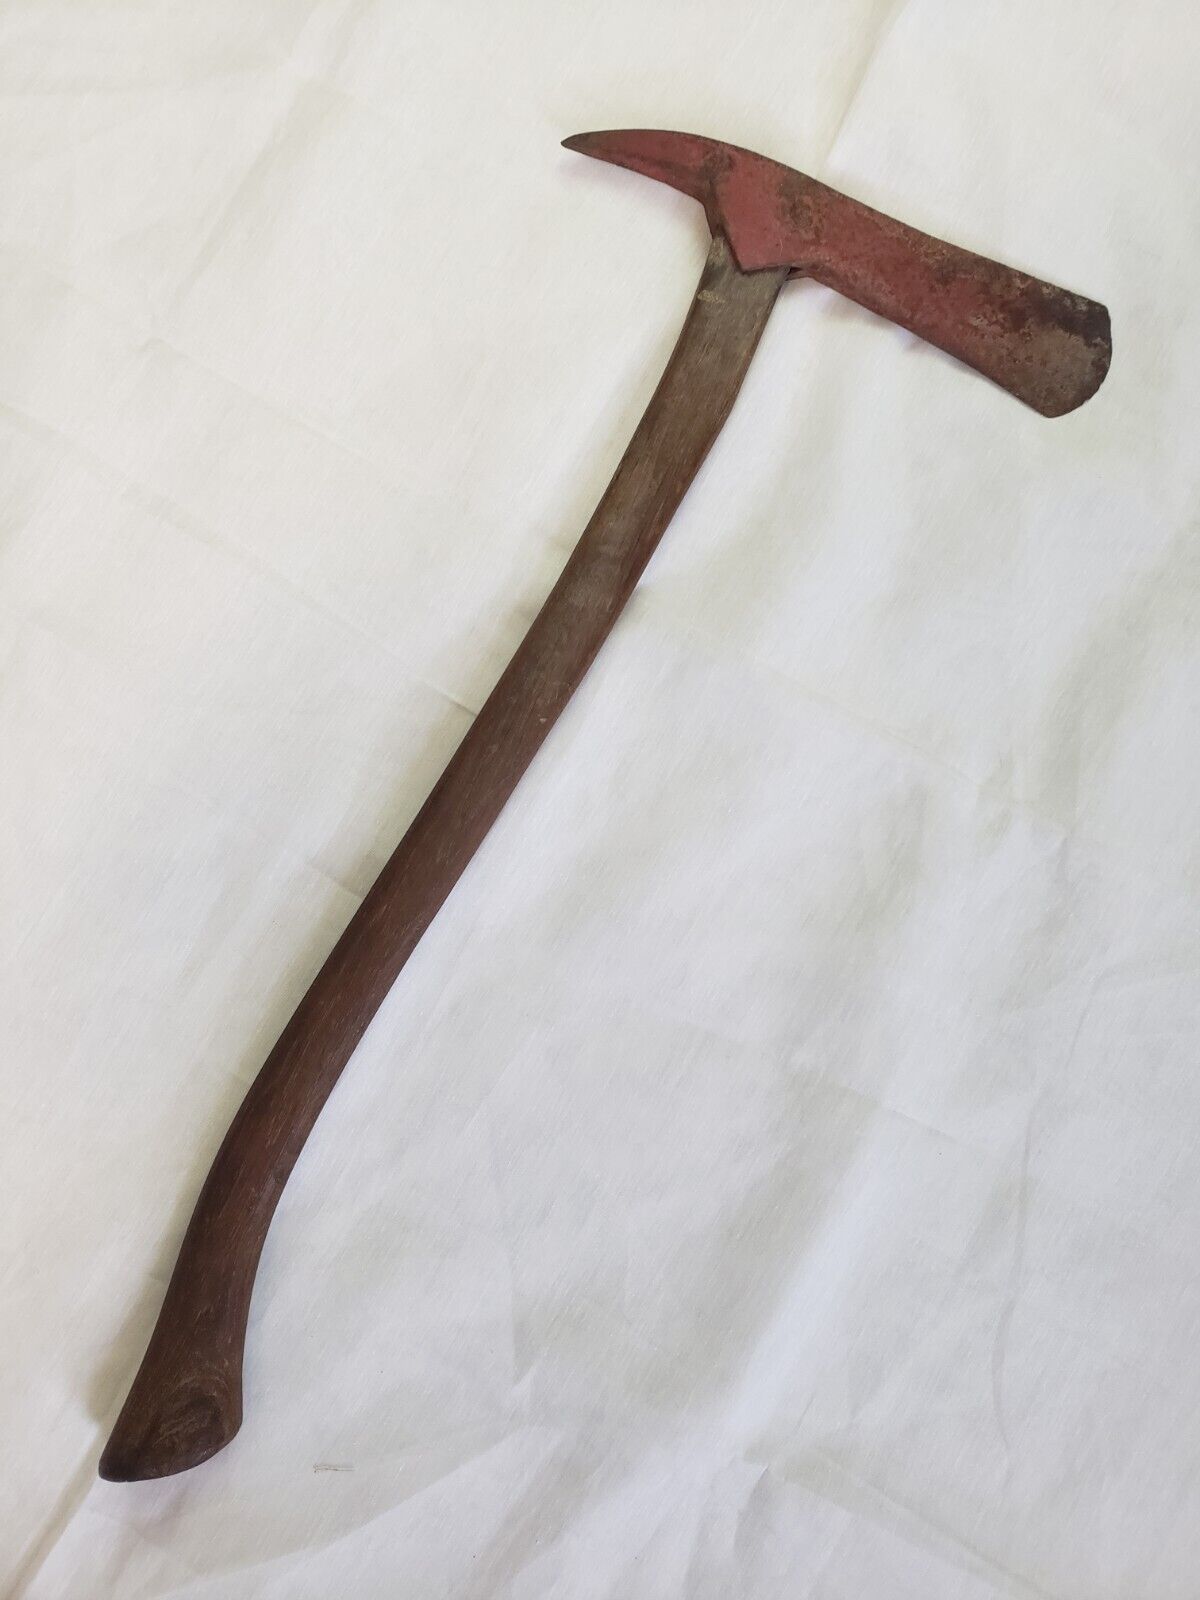 Antique Old Ice Harvesting Axe Hand Tool USA Vintage Primitive 